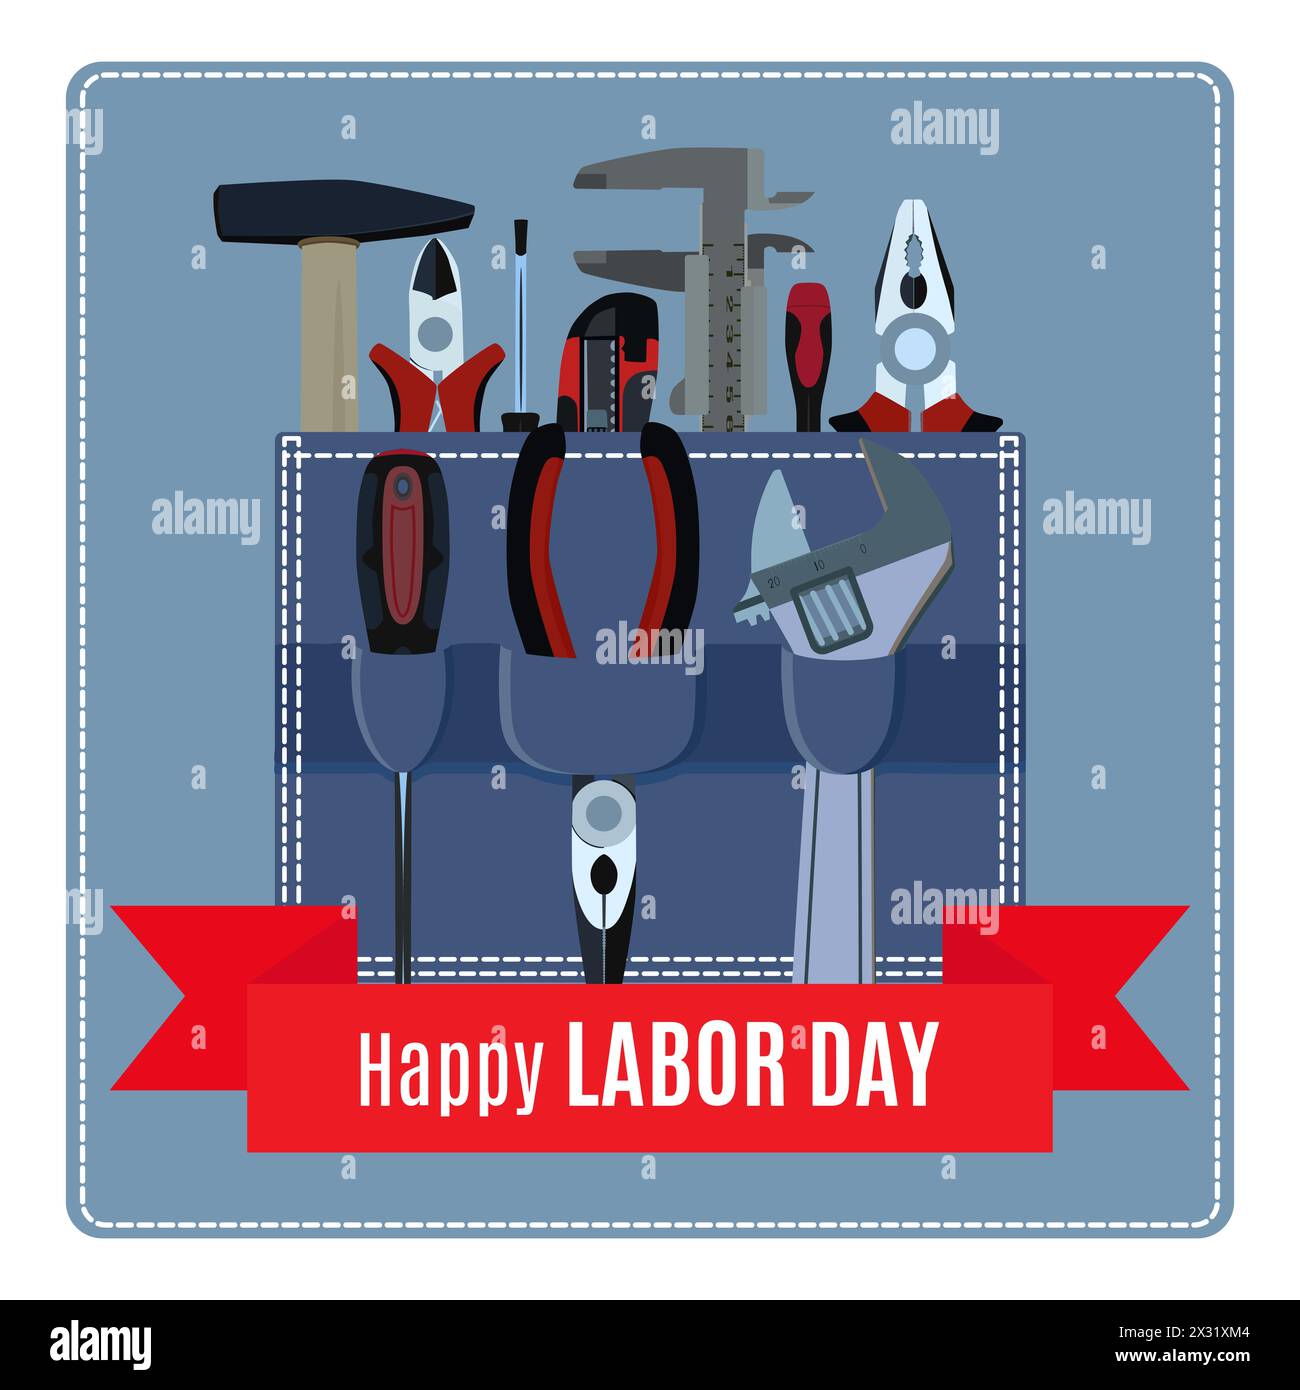 Happy Labor Day banner, sign, poster, vector illustration. Labour or Workers Day design element with hand tools in work apron pocket. Stock Vector